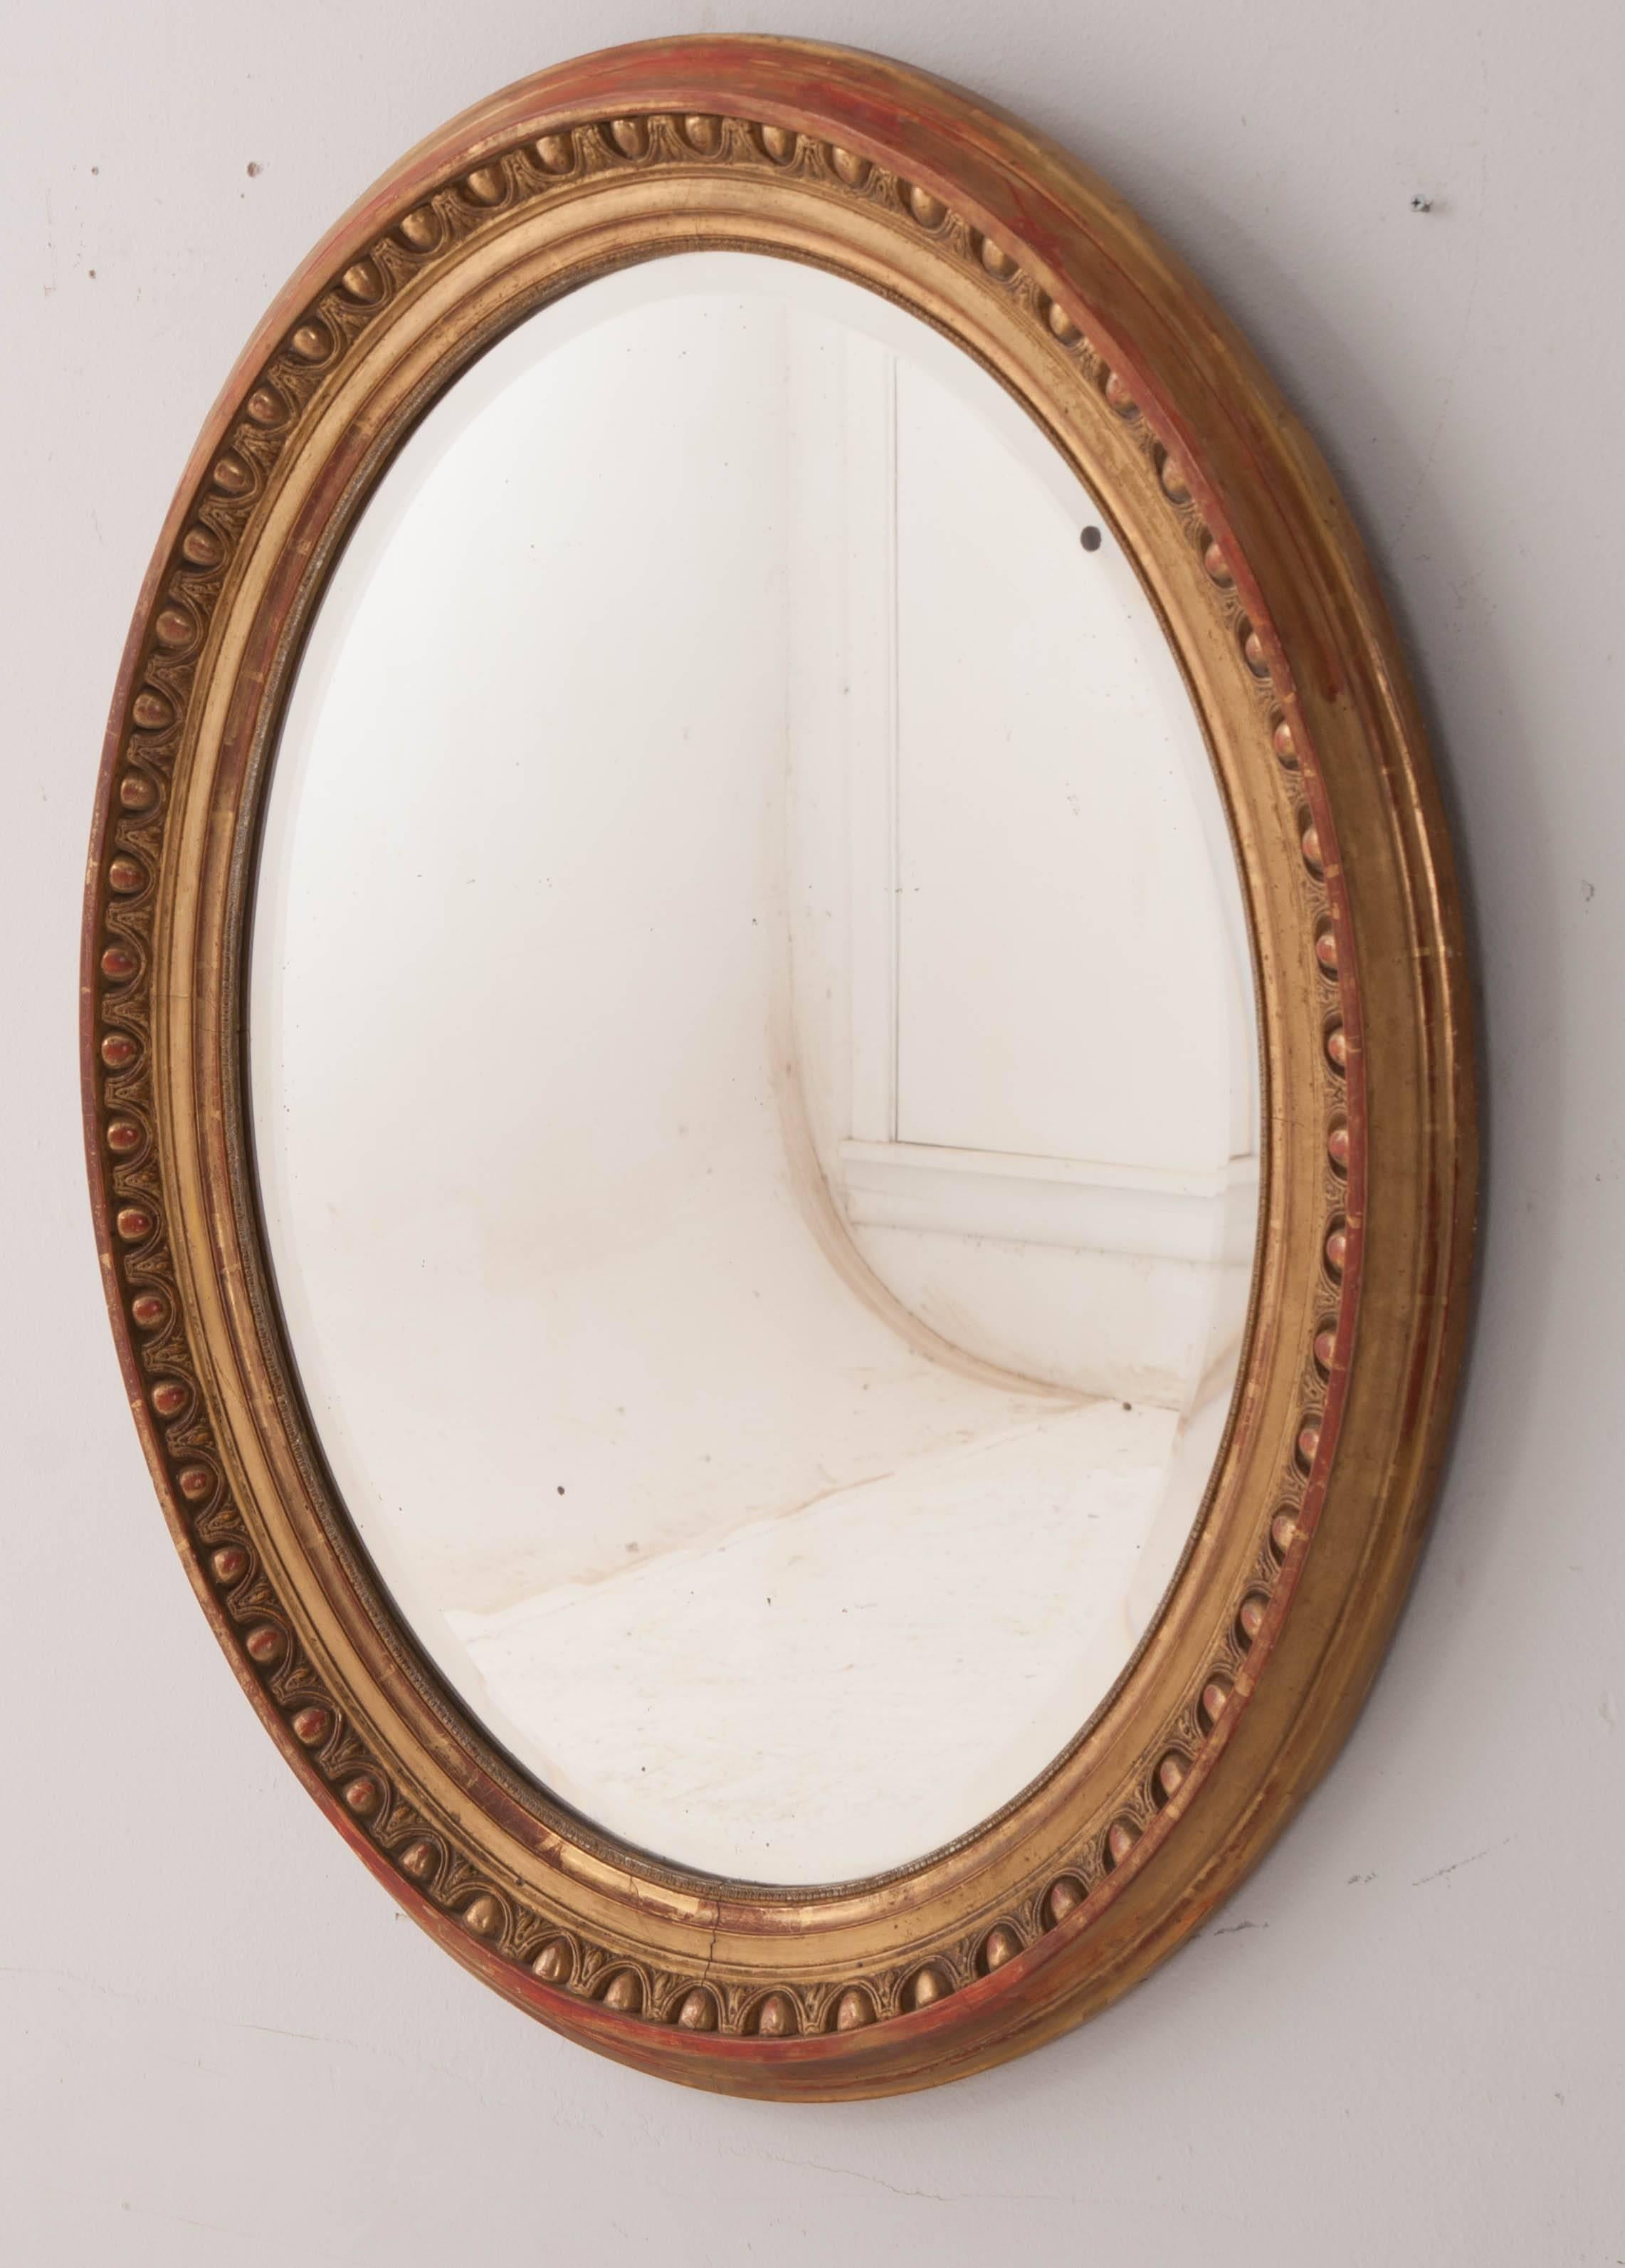 Spectacular patina overwhelms this gorgeous 19th century French oval mirror. The frame is embellished with an egg and dart motif that is finished in antique gold gilt that is stunning. Abundant French red warms the frame as it has become exposed